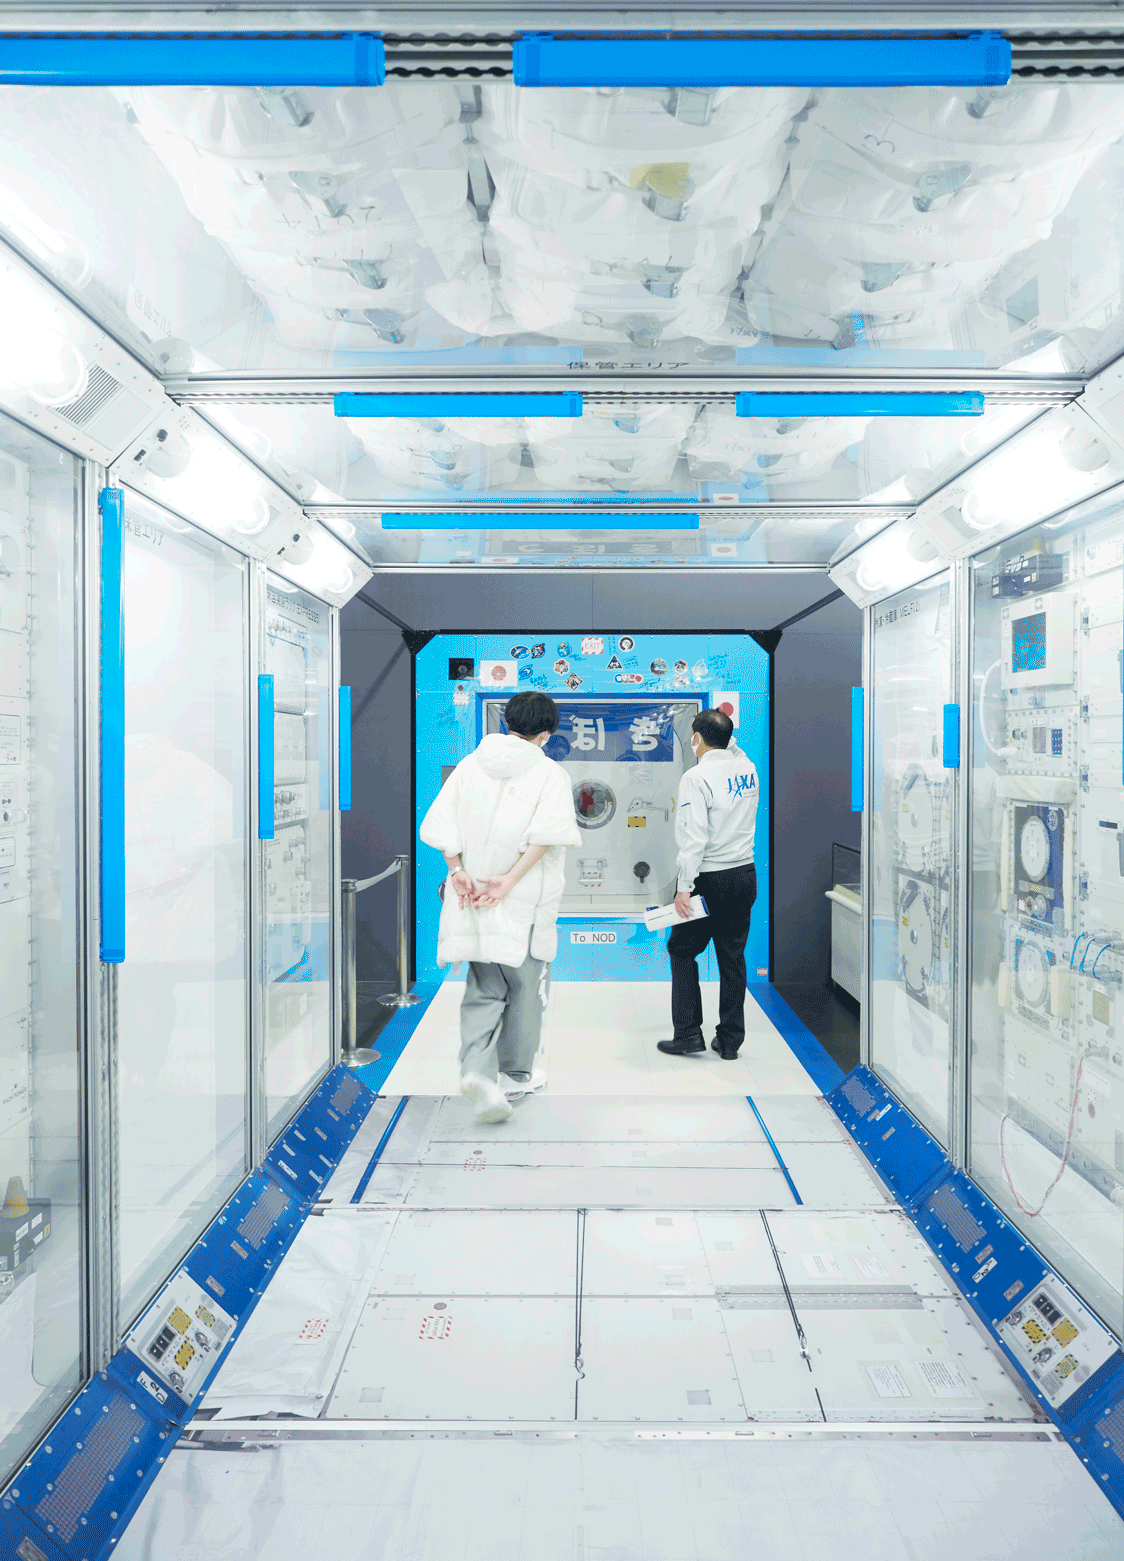 A full-scale model of the Japanese Experiment Module 